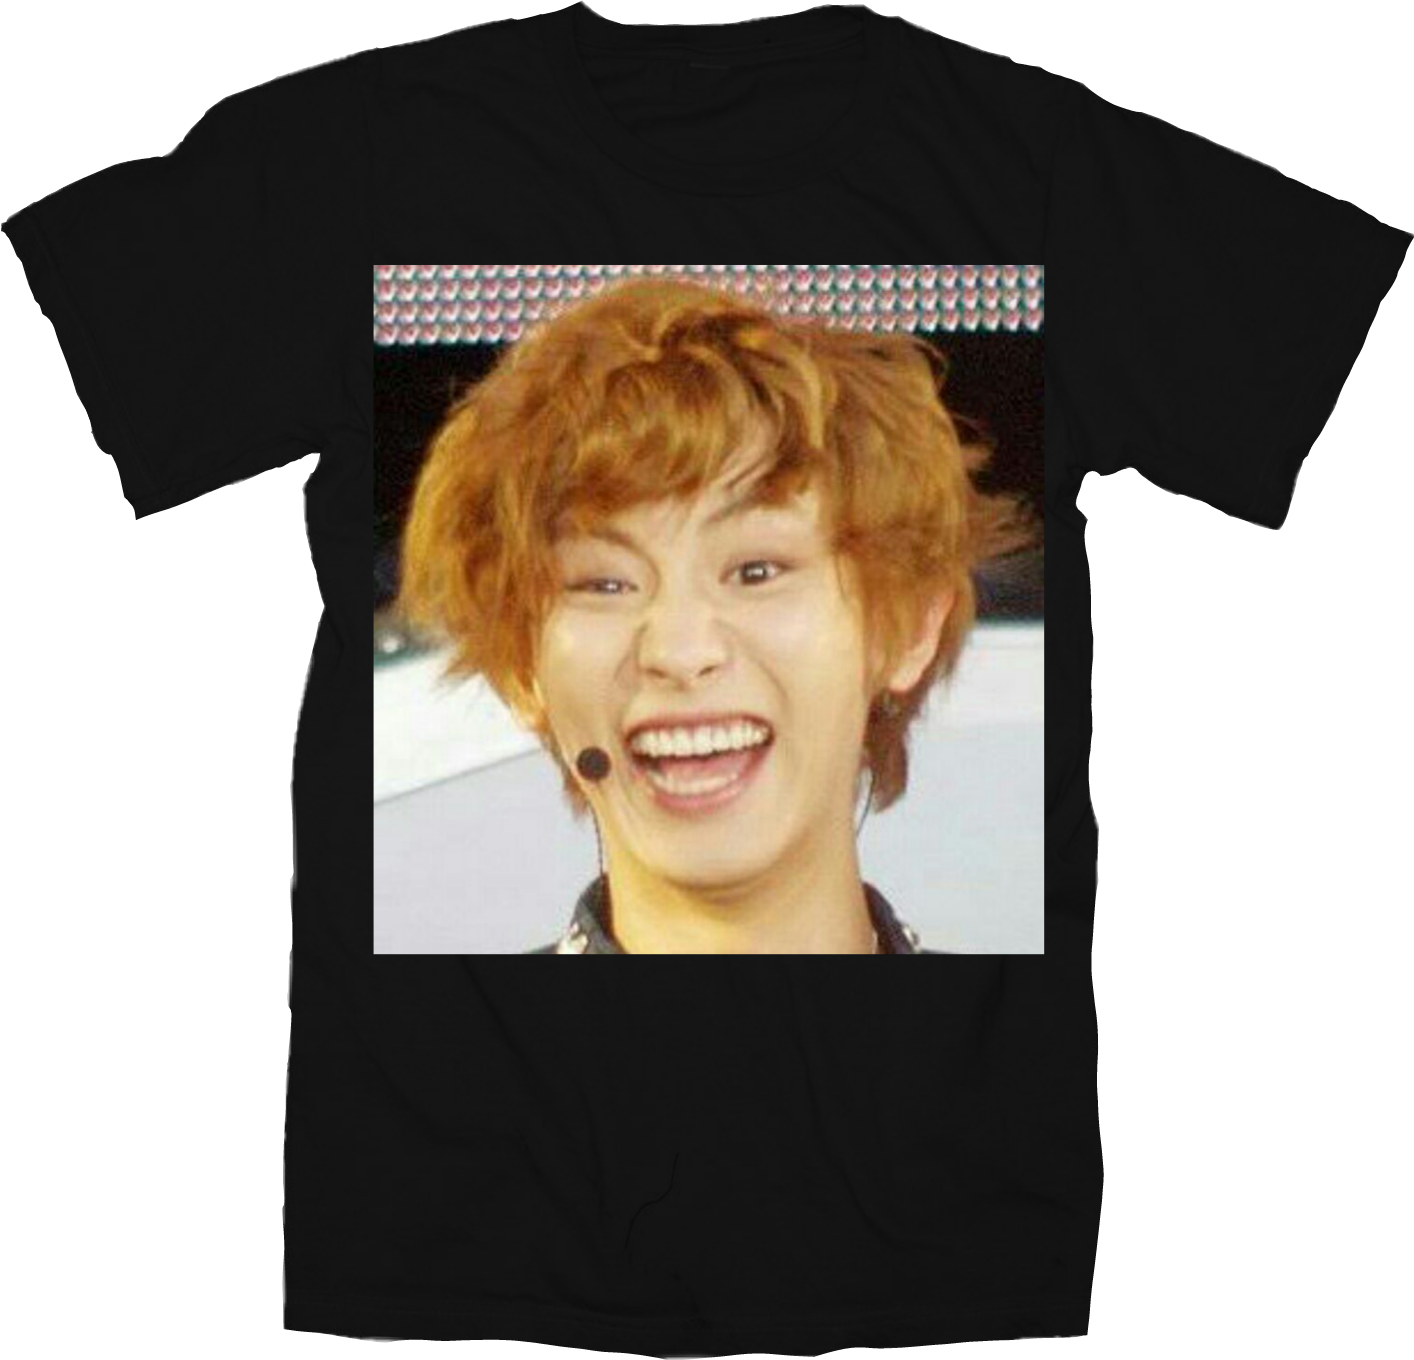 A Black Shirt With A Picture Of A Woman Smiling